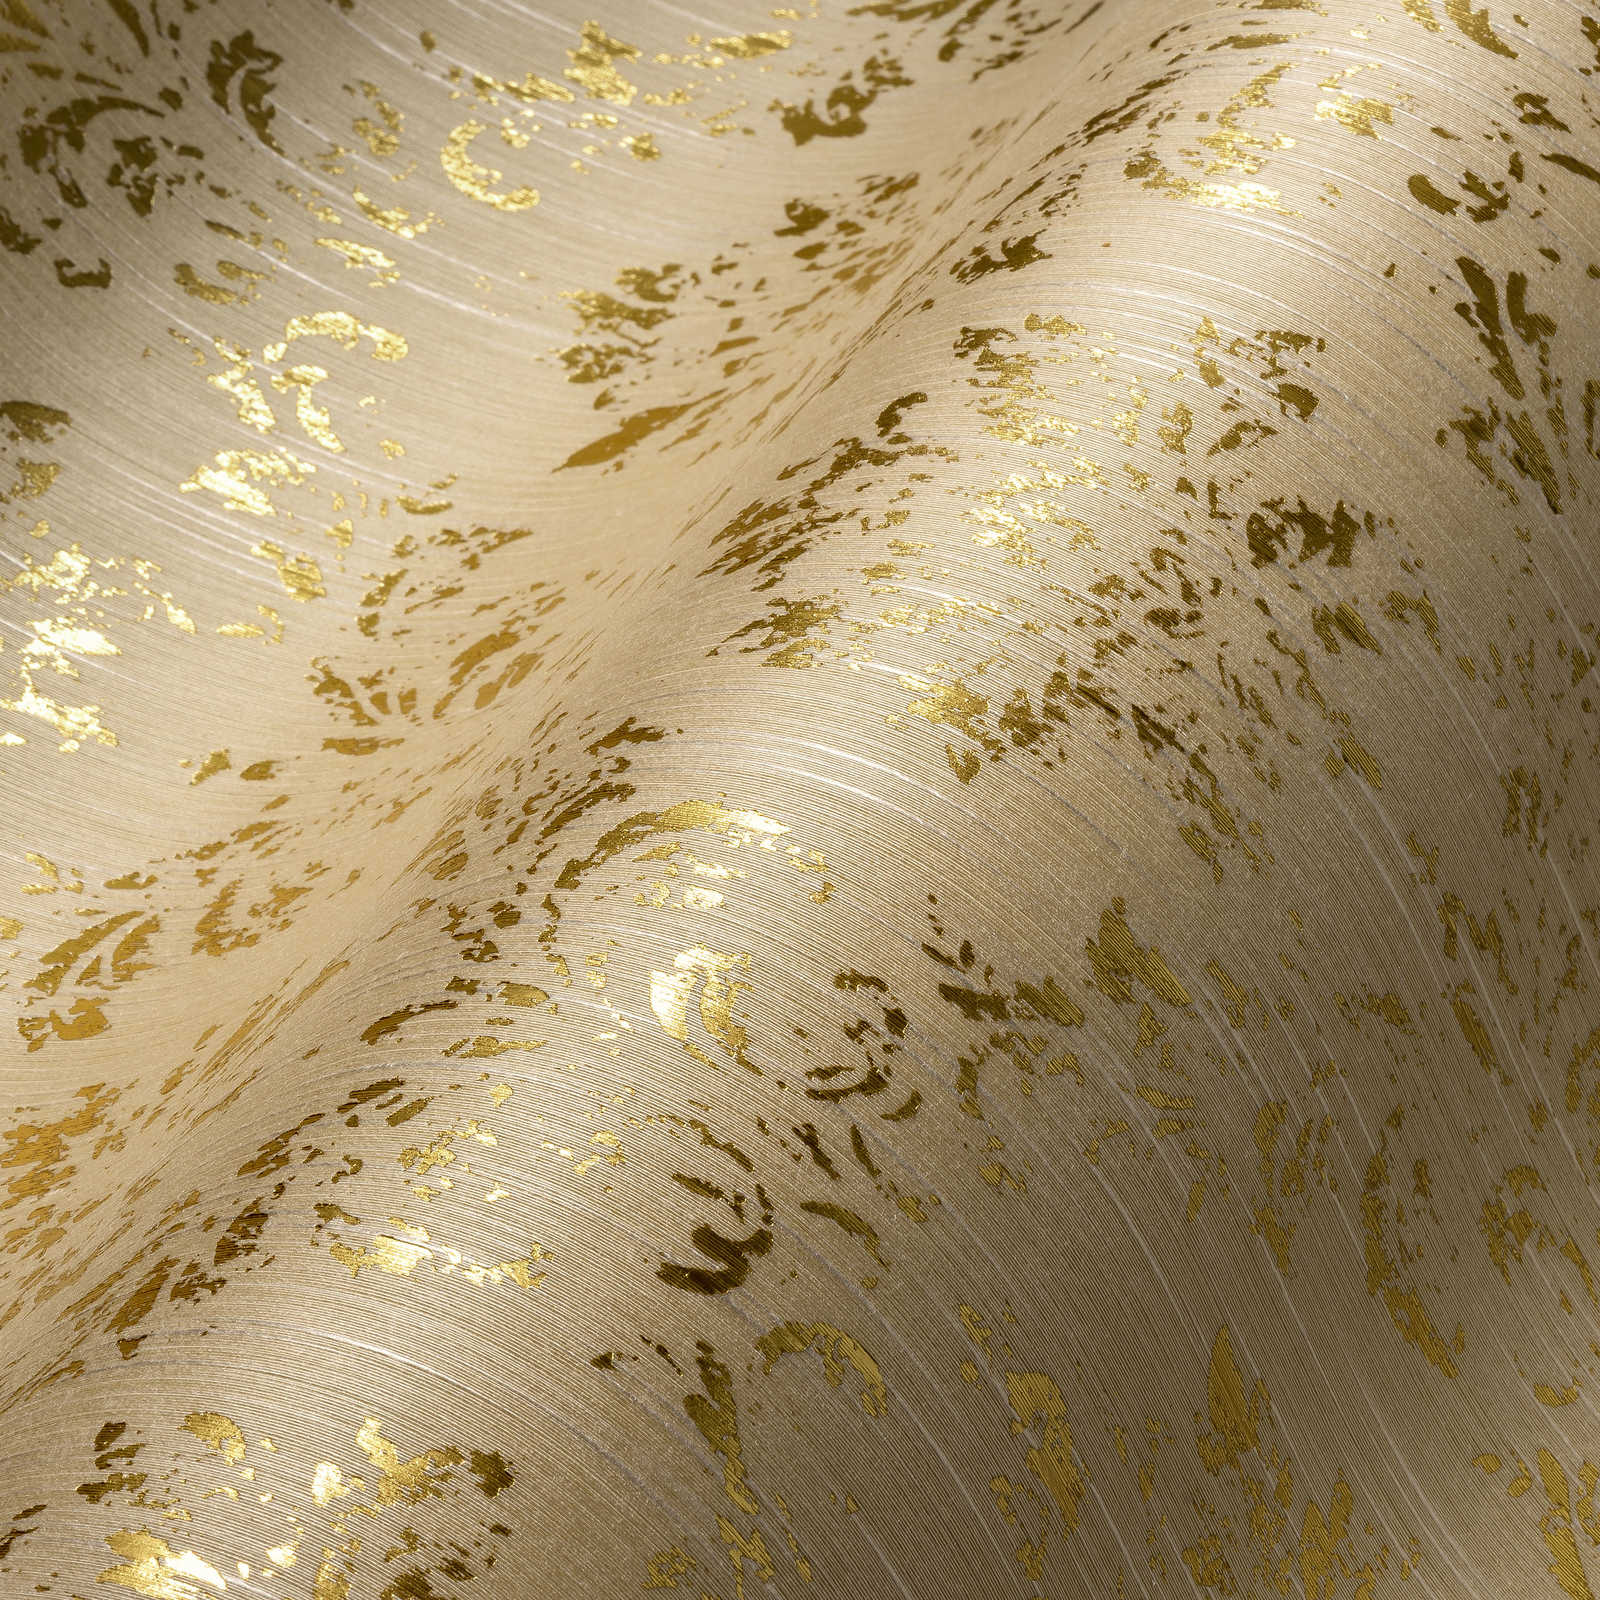             Wallpaper with gold ornaments in used look - cream, gold
        